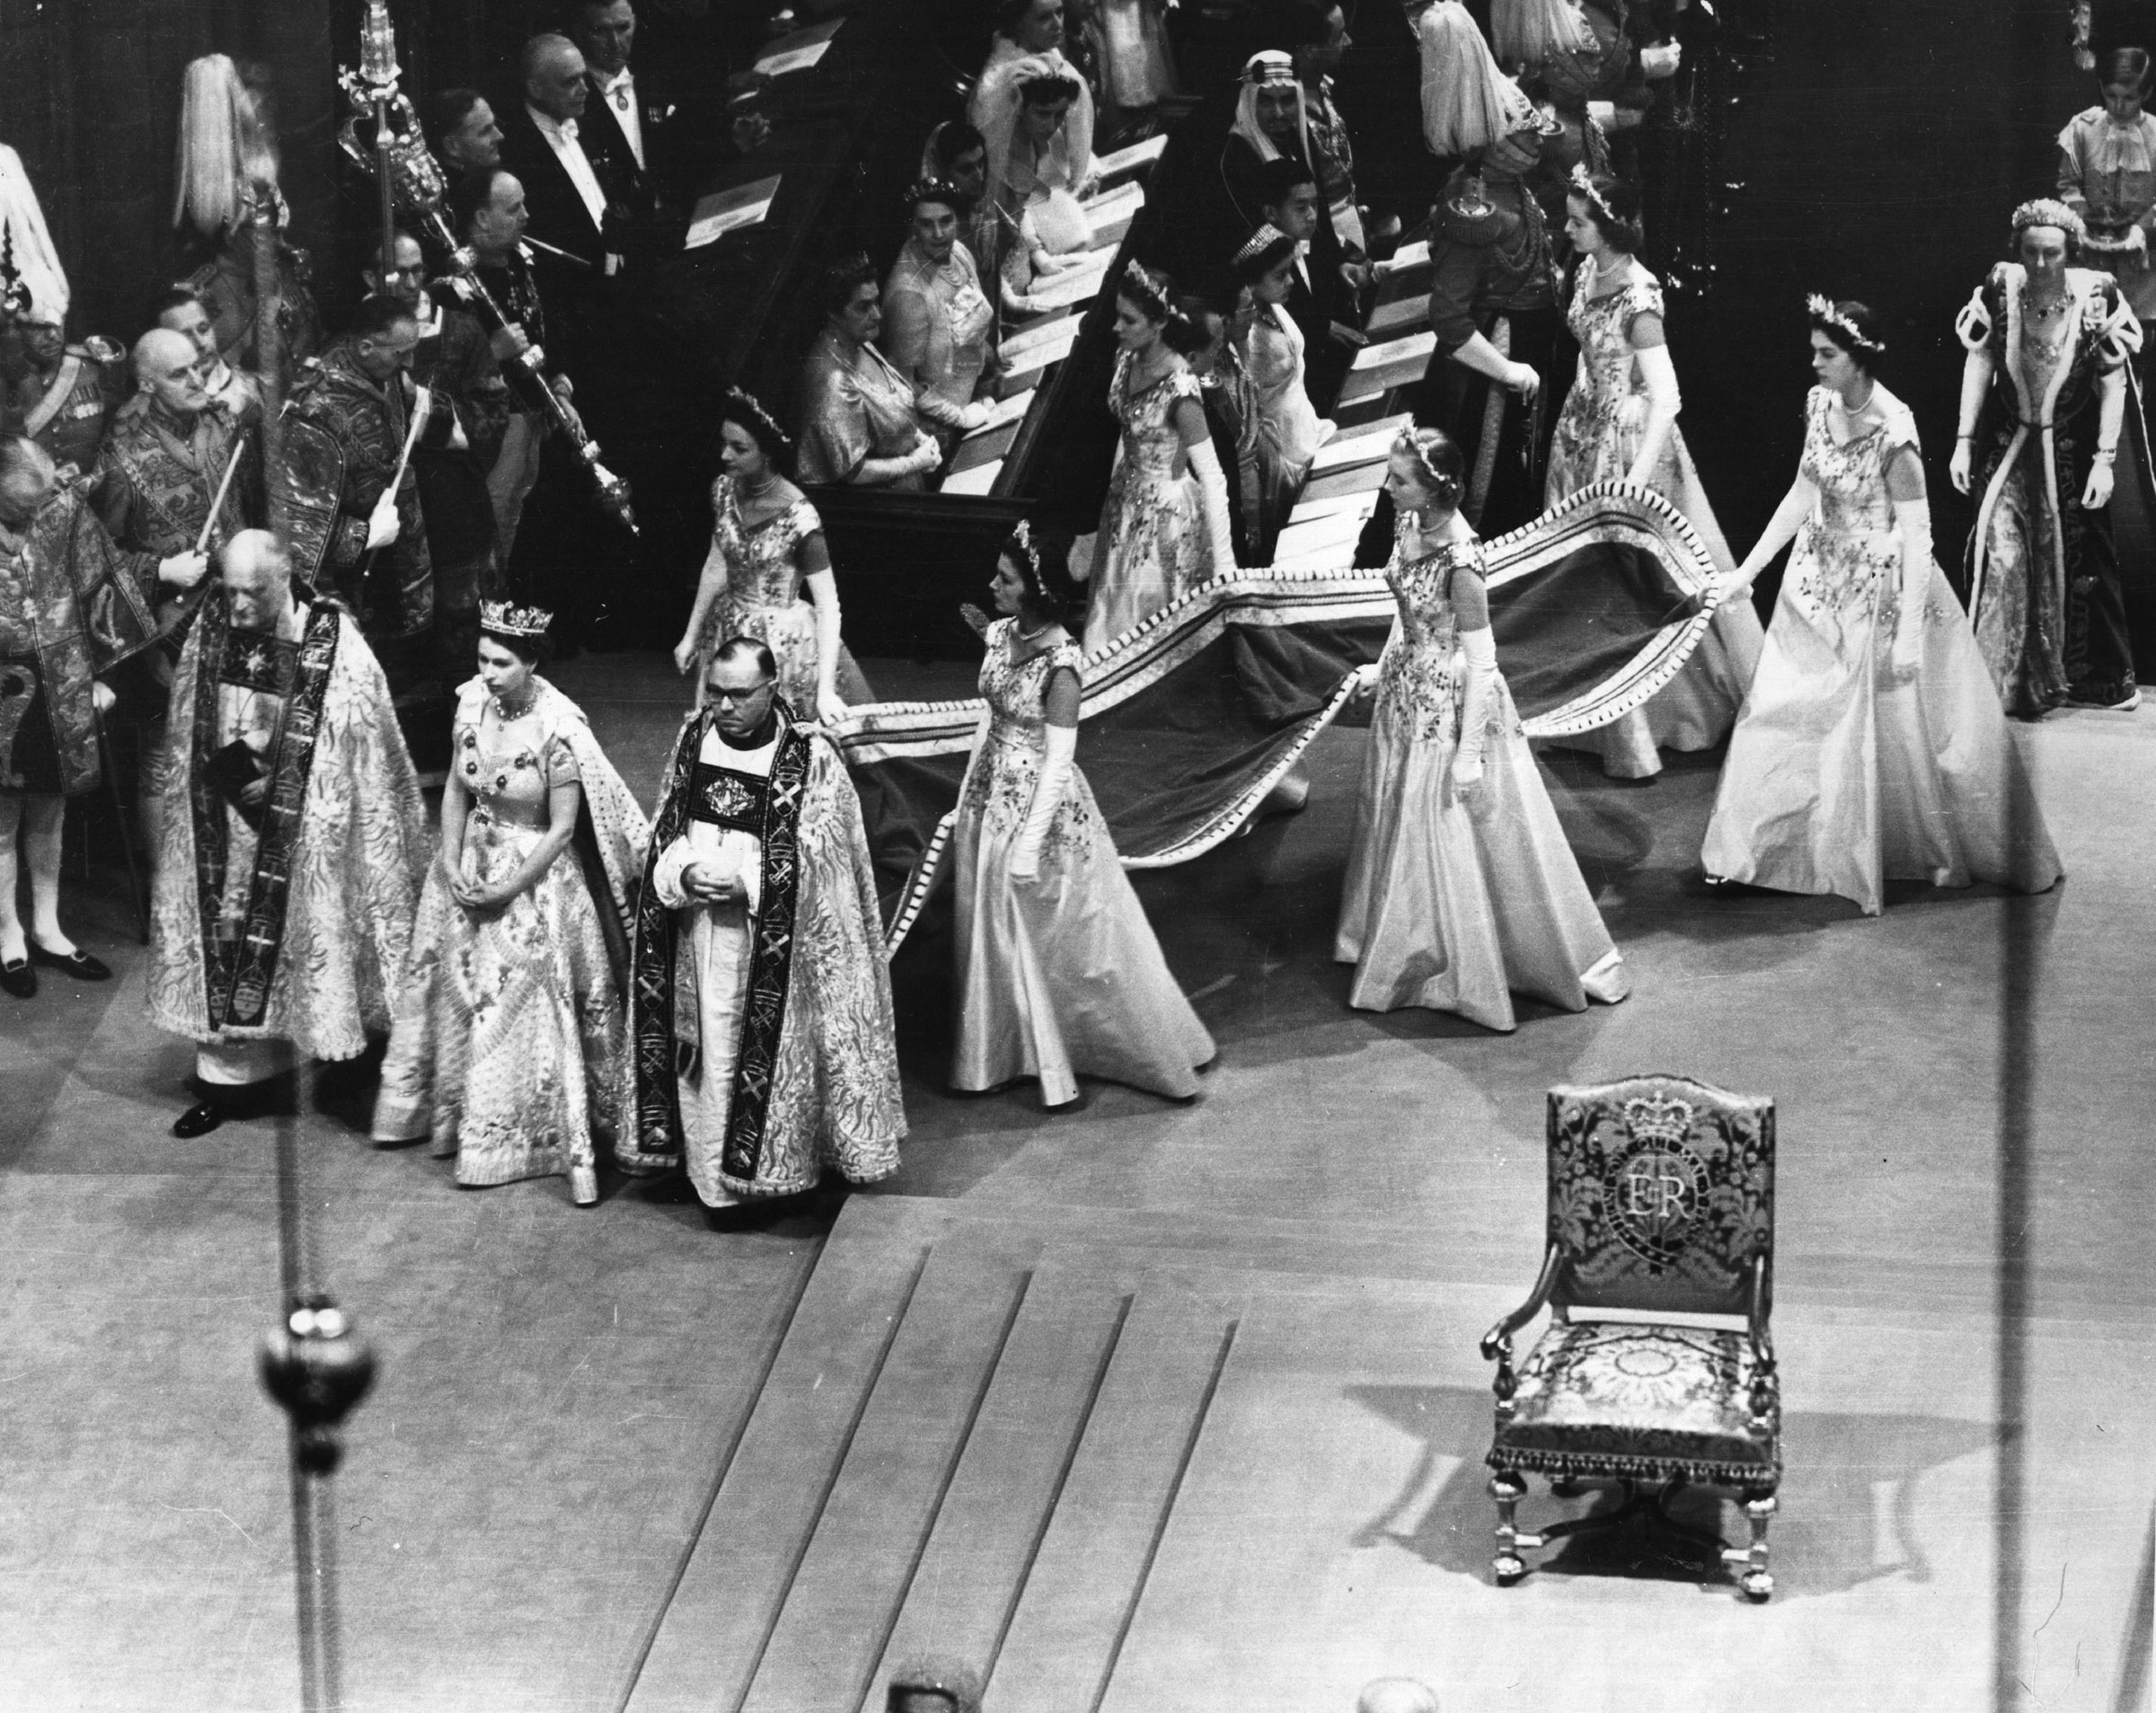 The Queen and her retinue, who are carrying her train, at her coronation. (Hulton Archive/Getty Images)